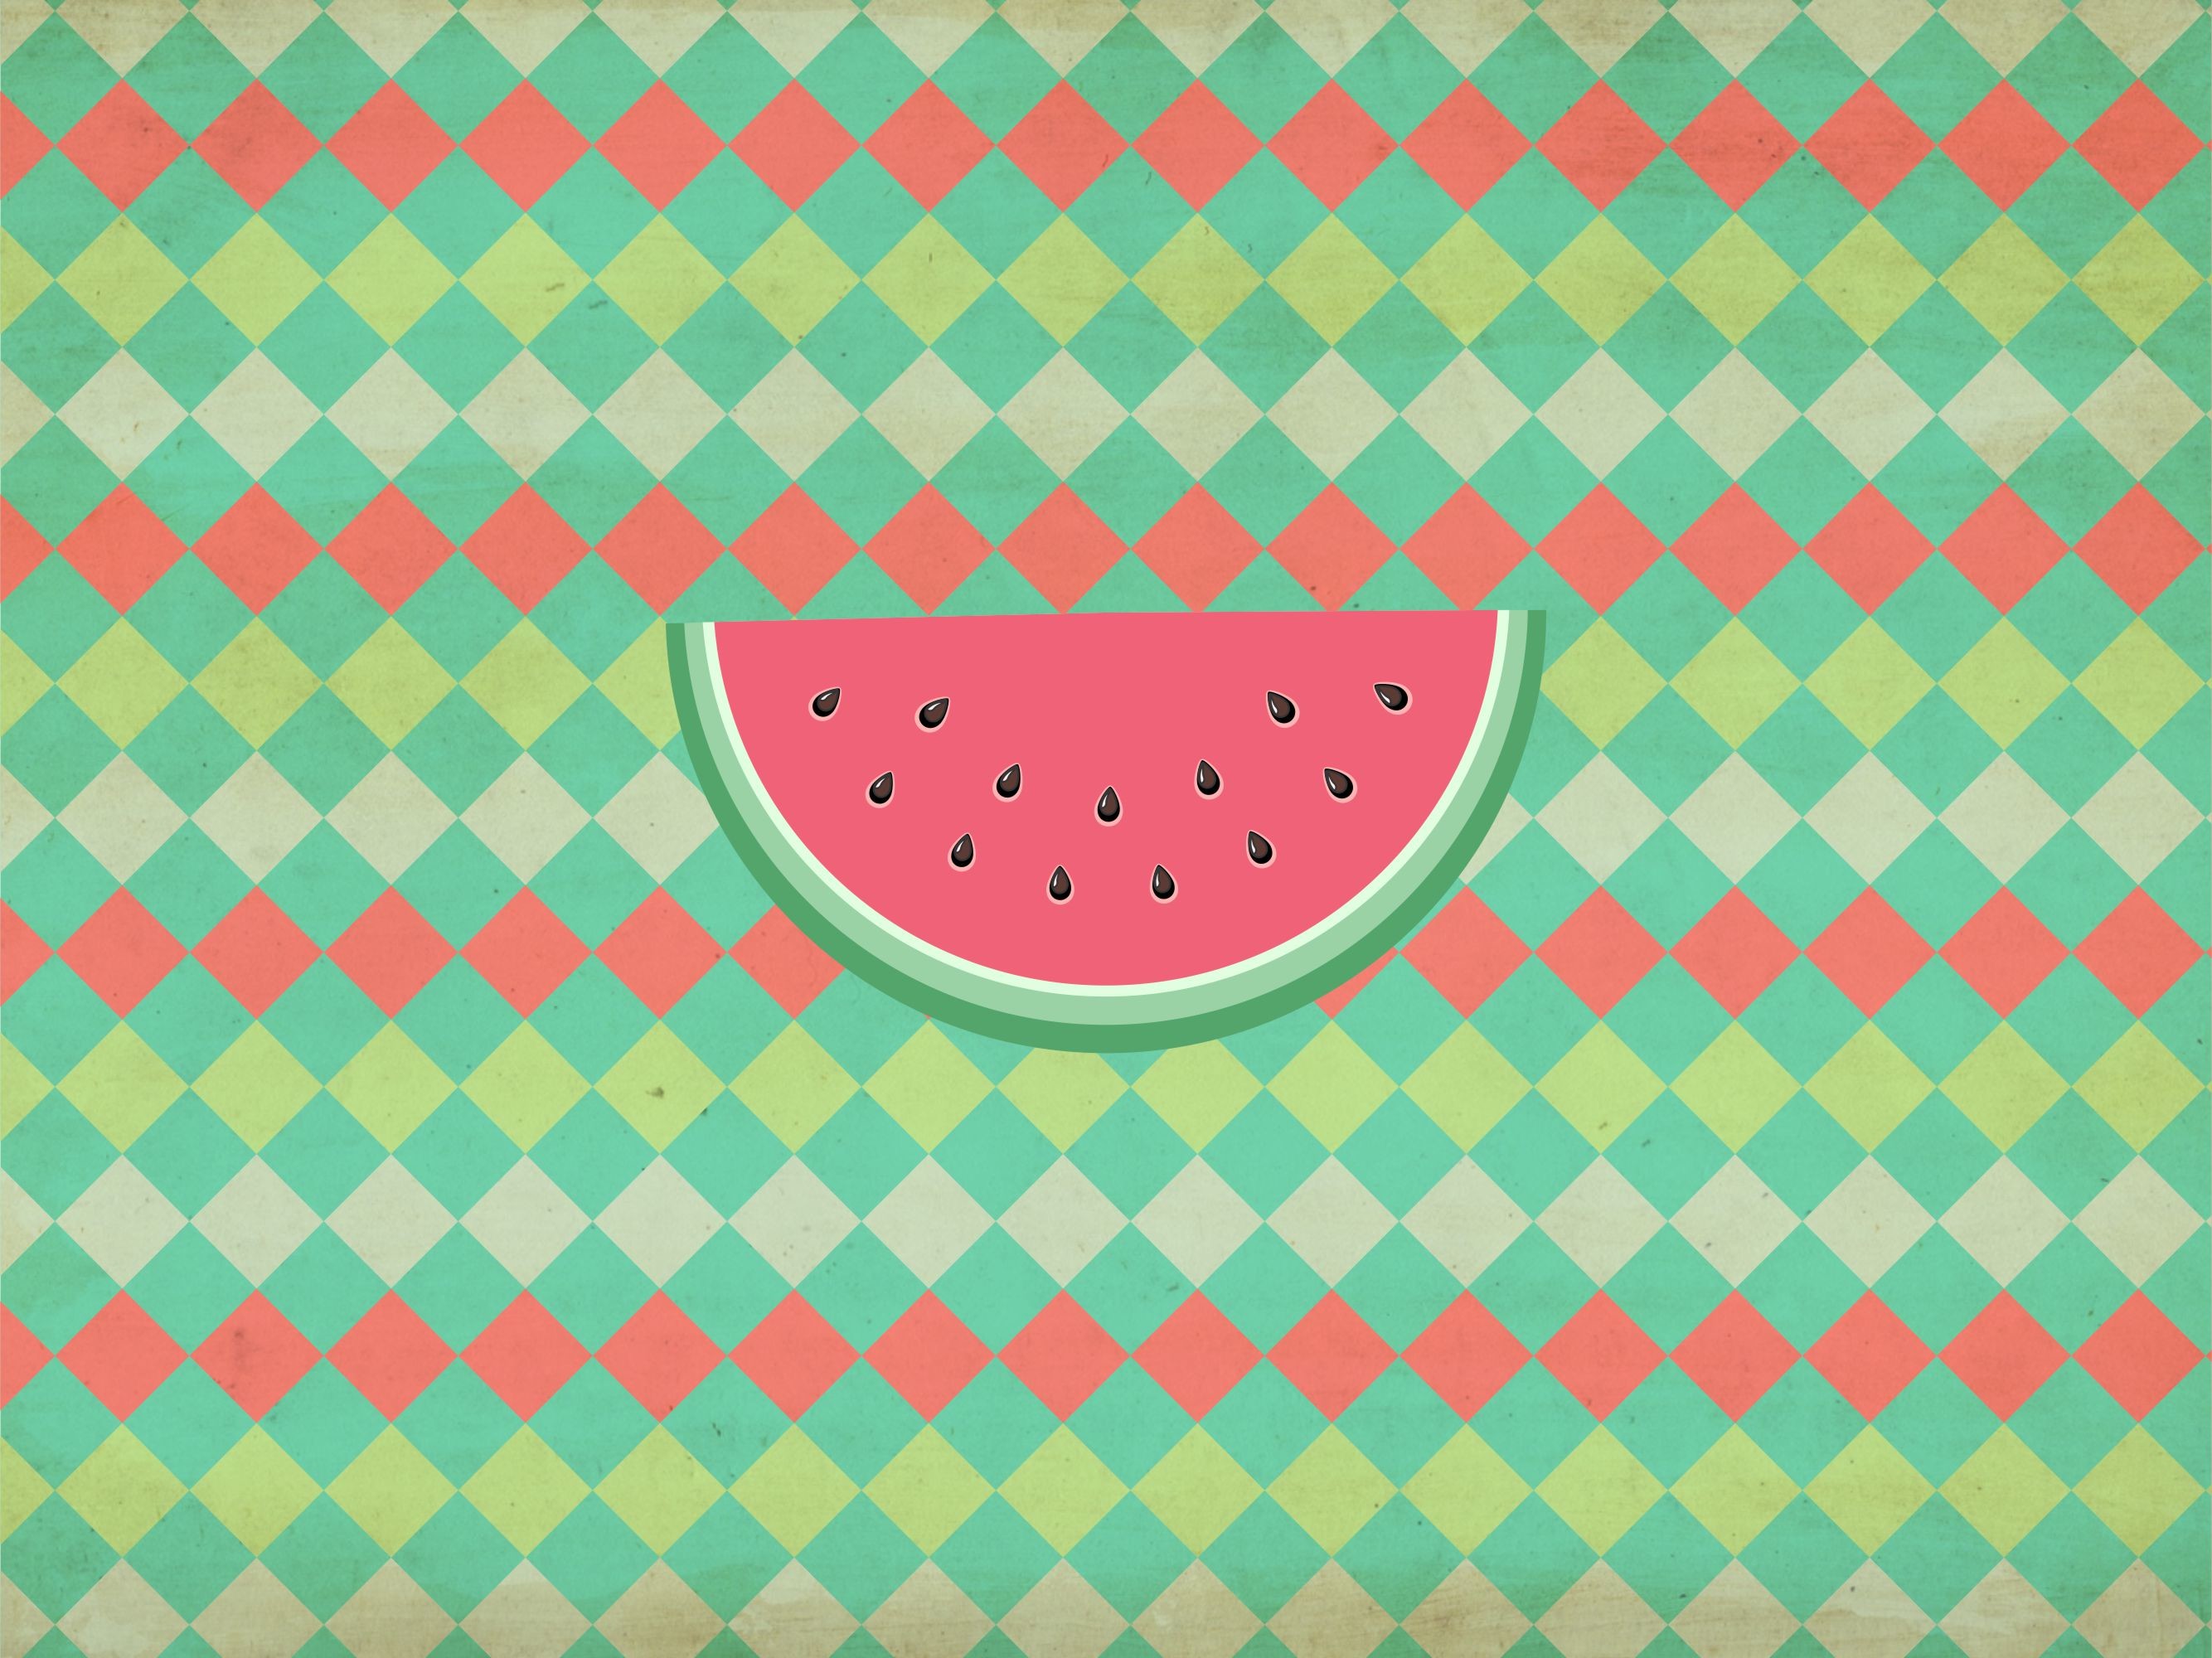 2668x2000 Watermelon wallpaper for Ipads and tablet so sweet and cute.Feel free to  use.